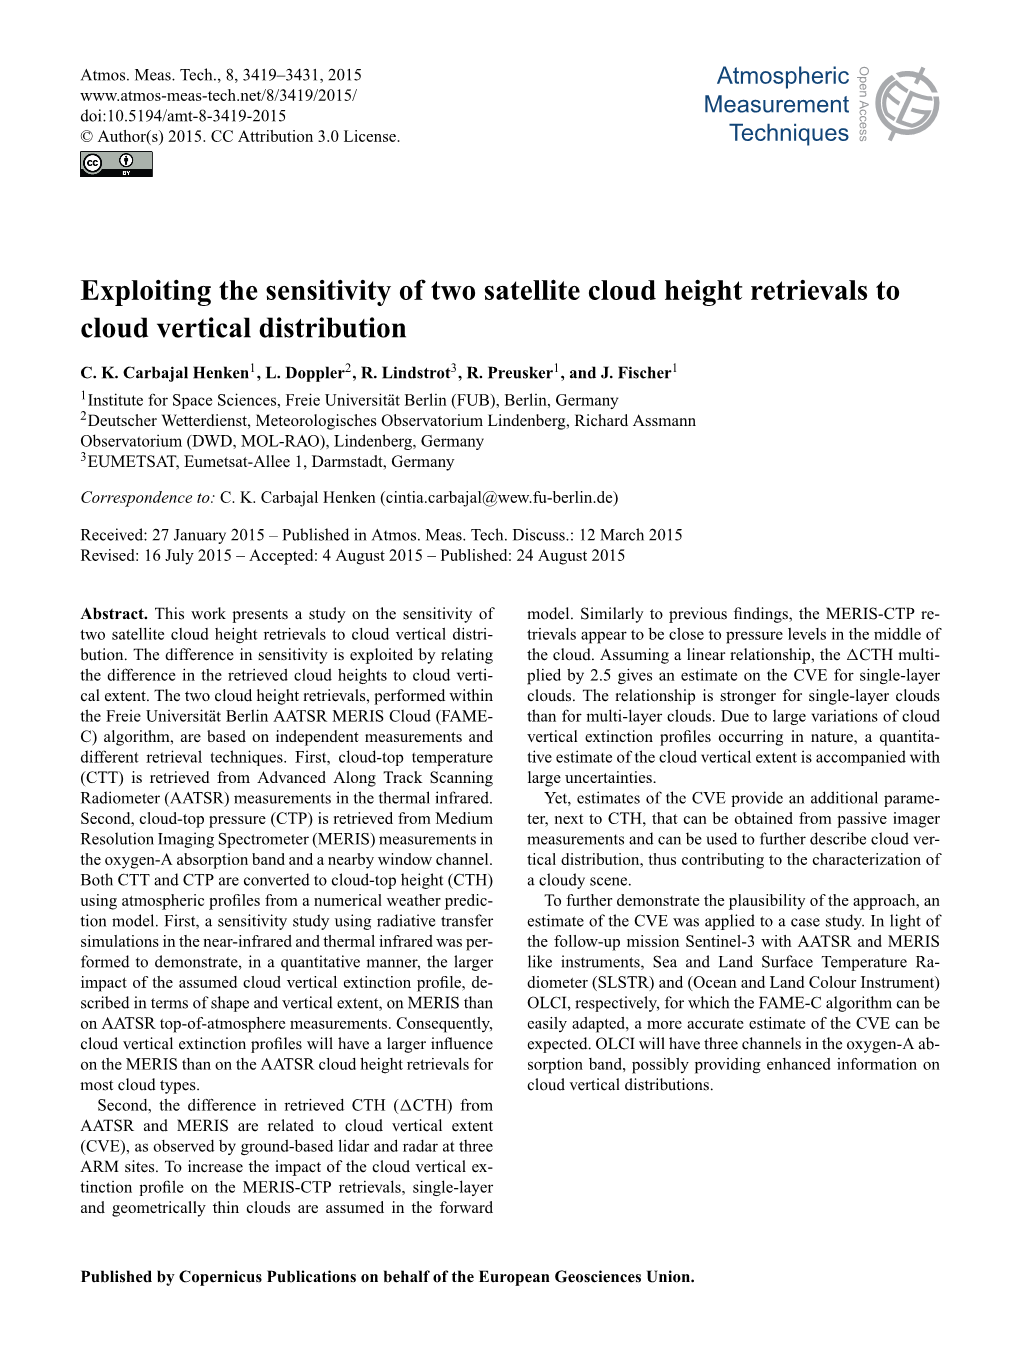 Exploiting the Sensitivity of Two Satellite Cloud Height Retrievals to Cloud Vertical Distribution